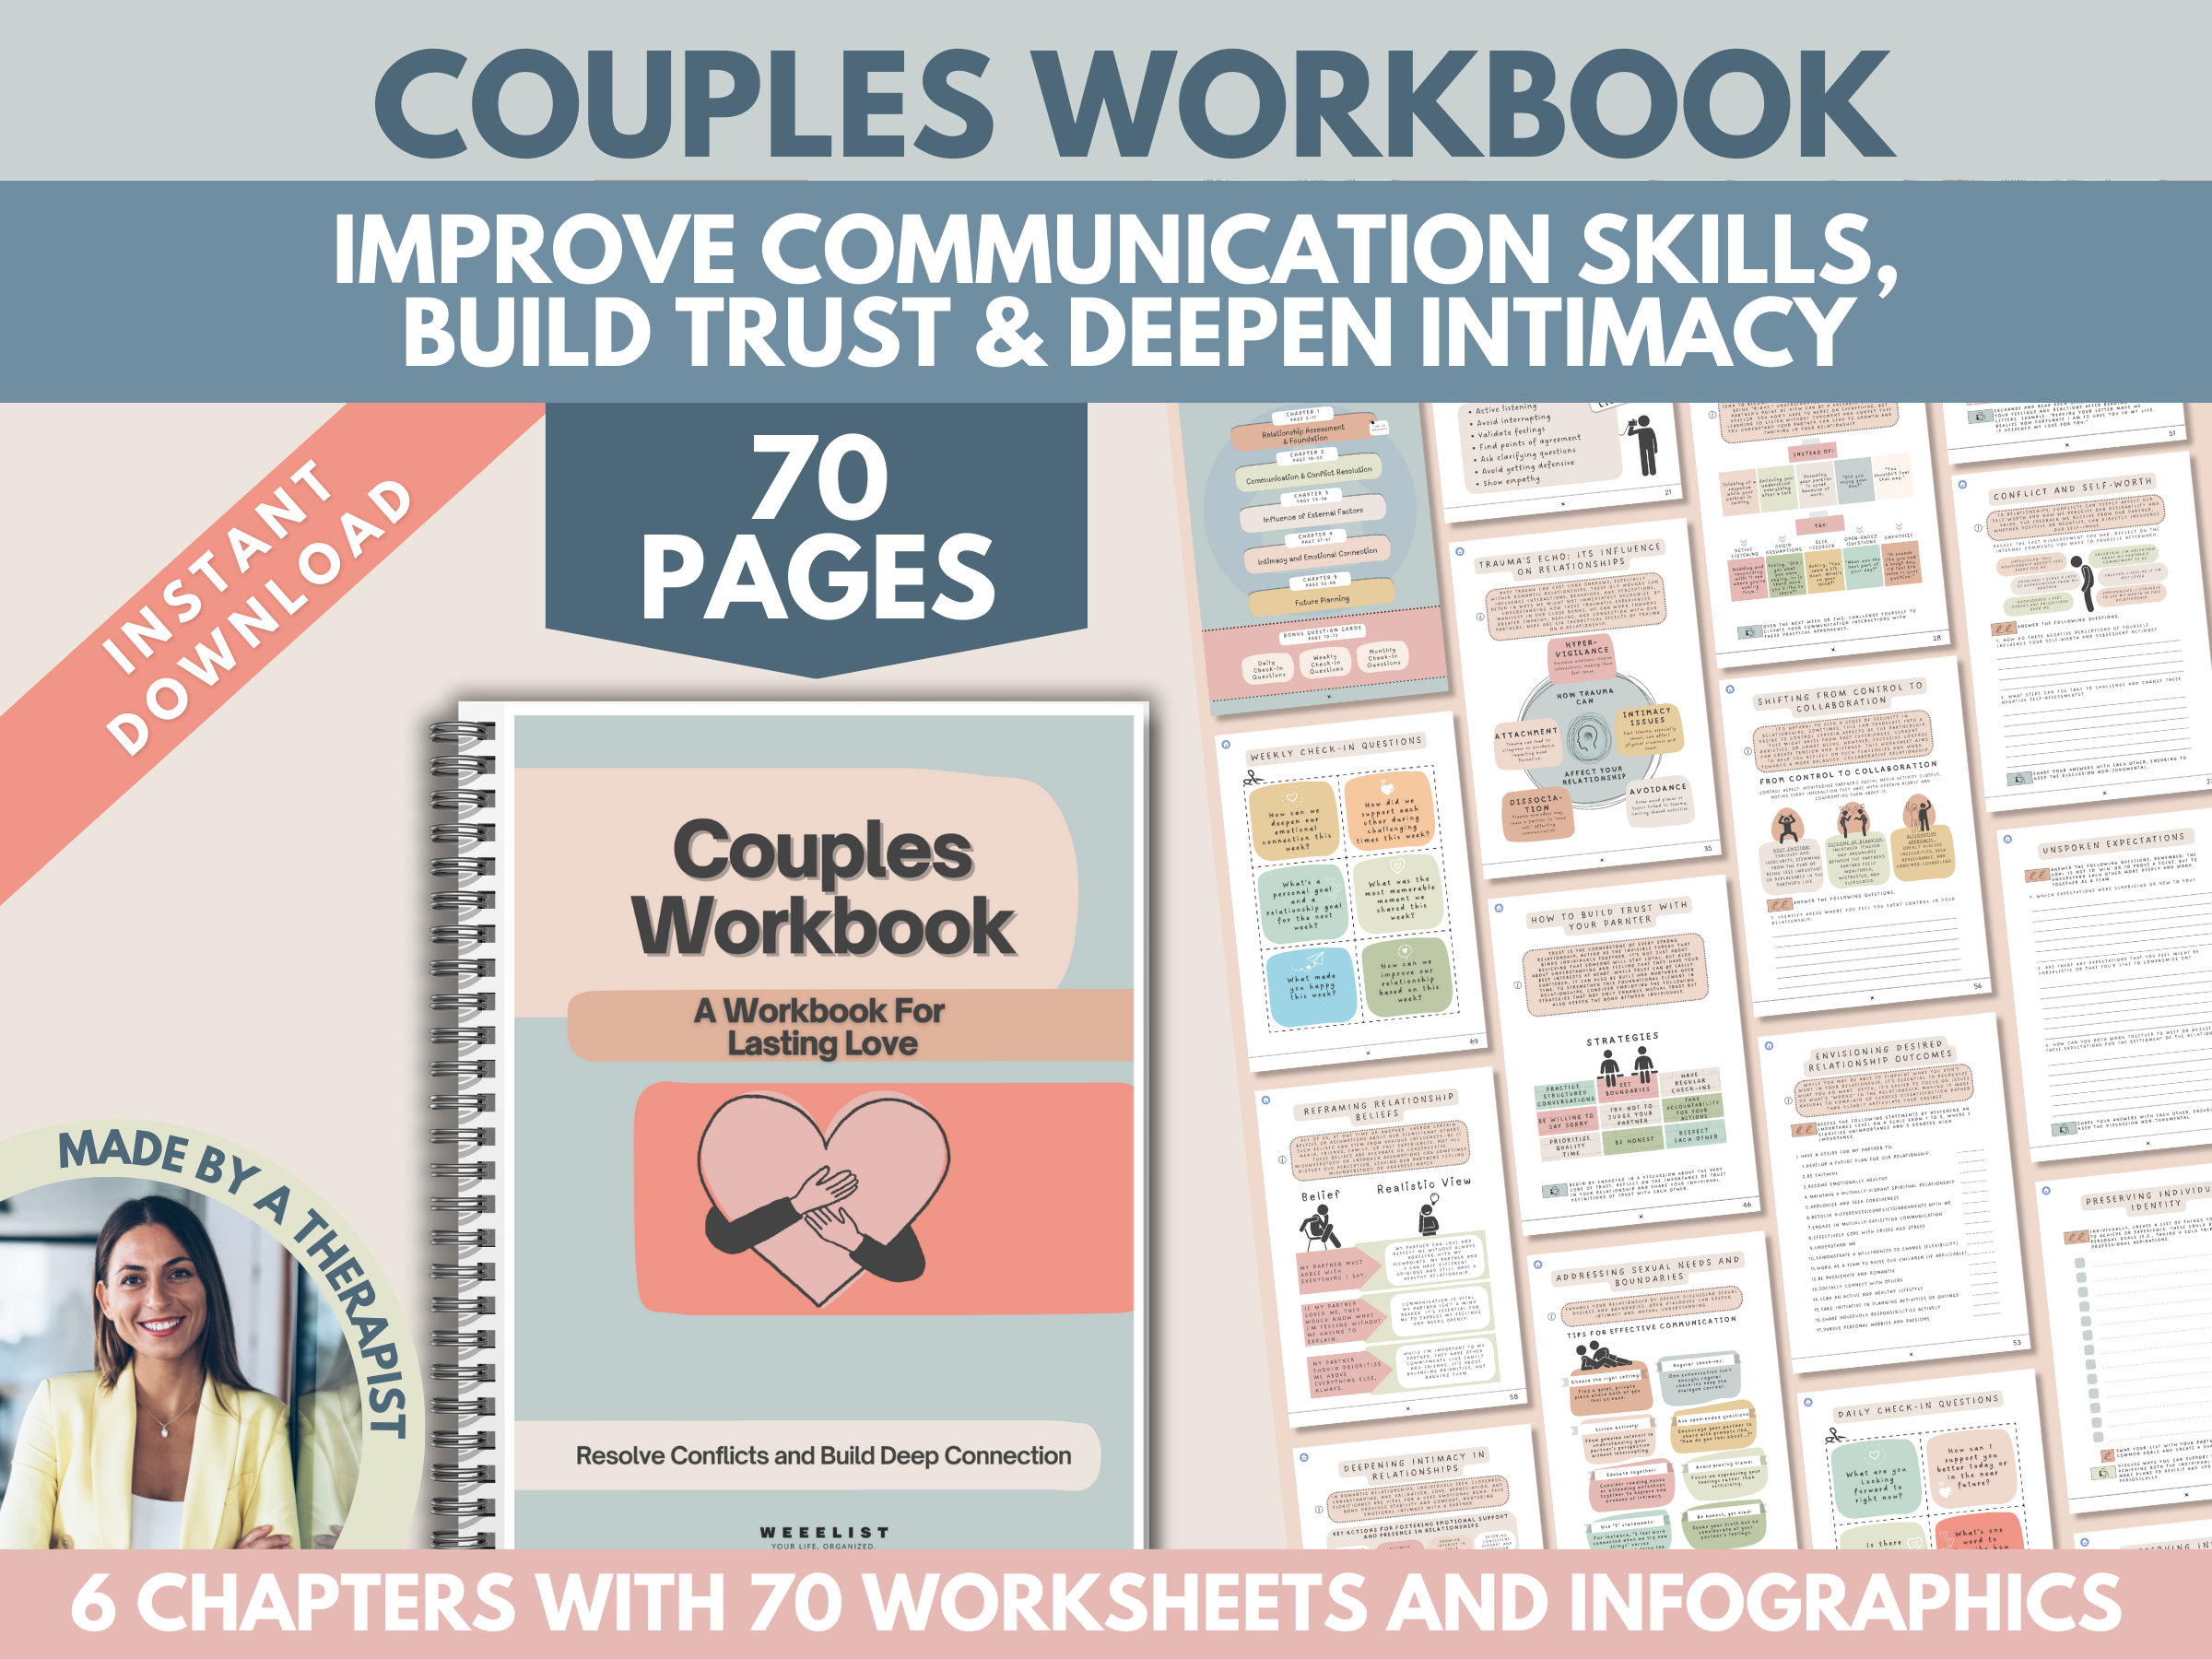 Ultimate Game Bundle  4 Intimacy-Building Games for Couples